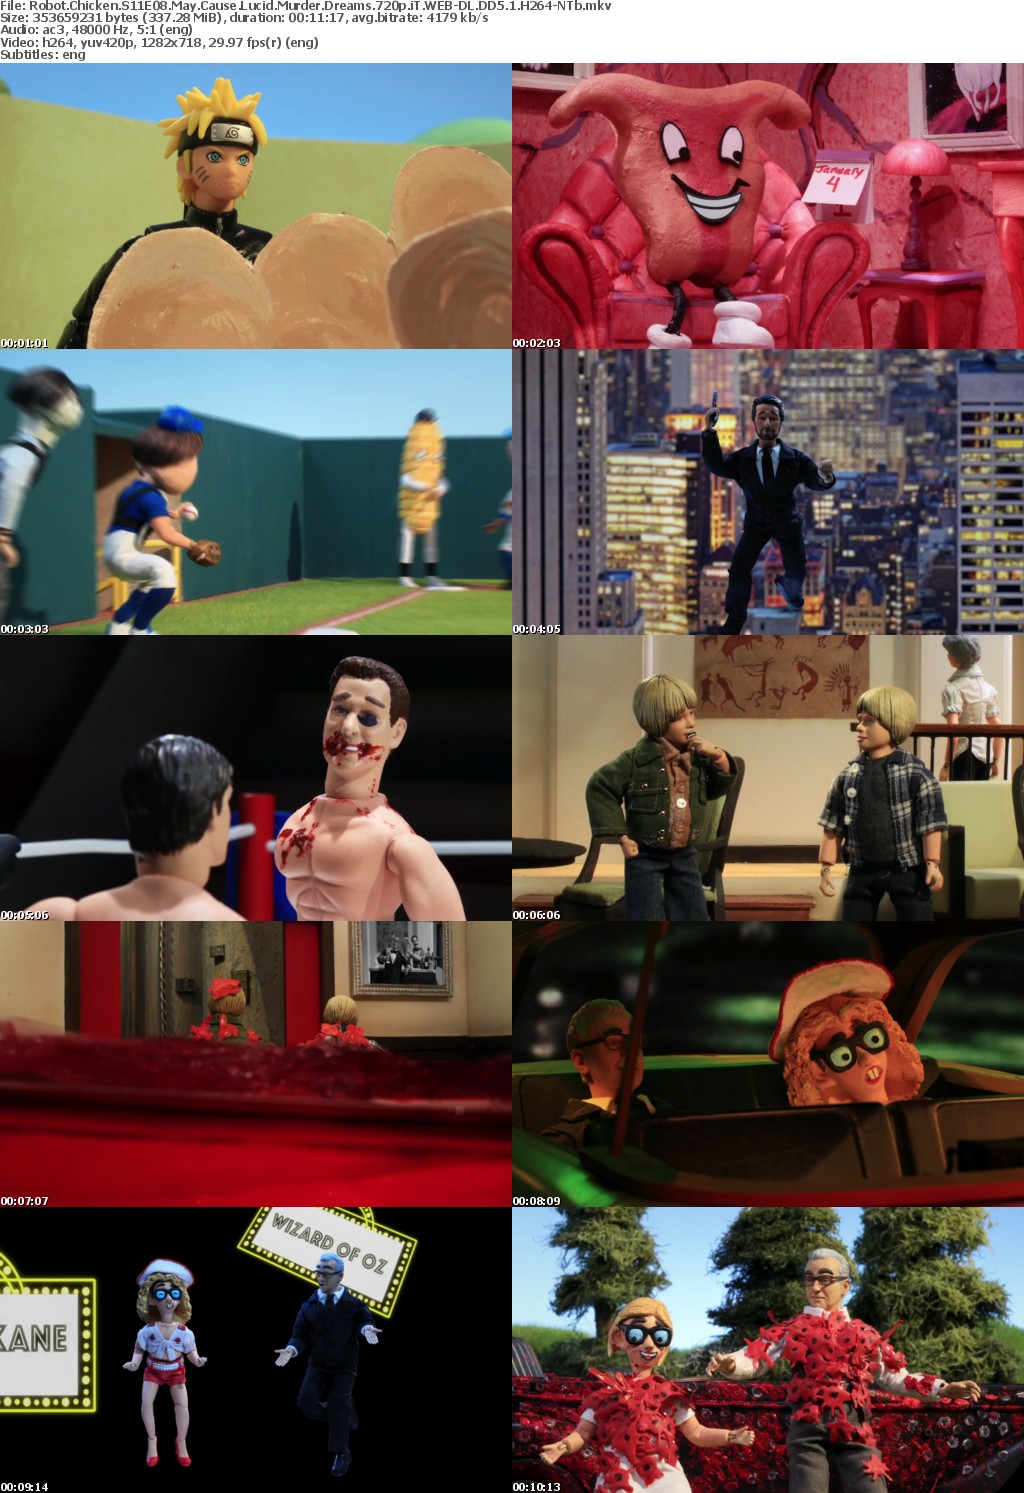 Robot Chicken S11E08 May Cause Lucid Murder Dreams 720p WEB-DL DD5 1 H264-NTb